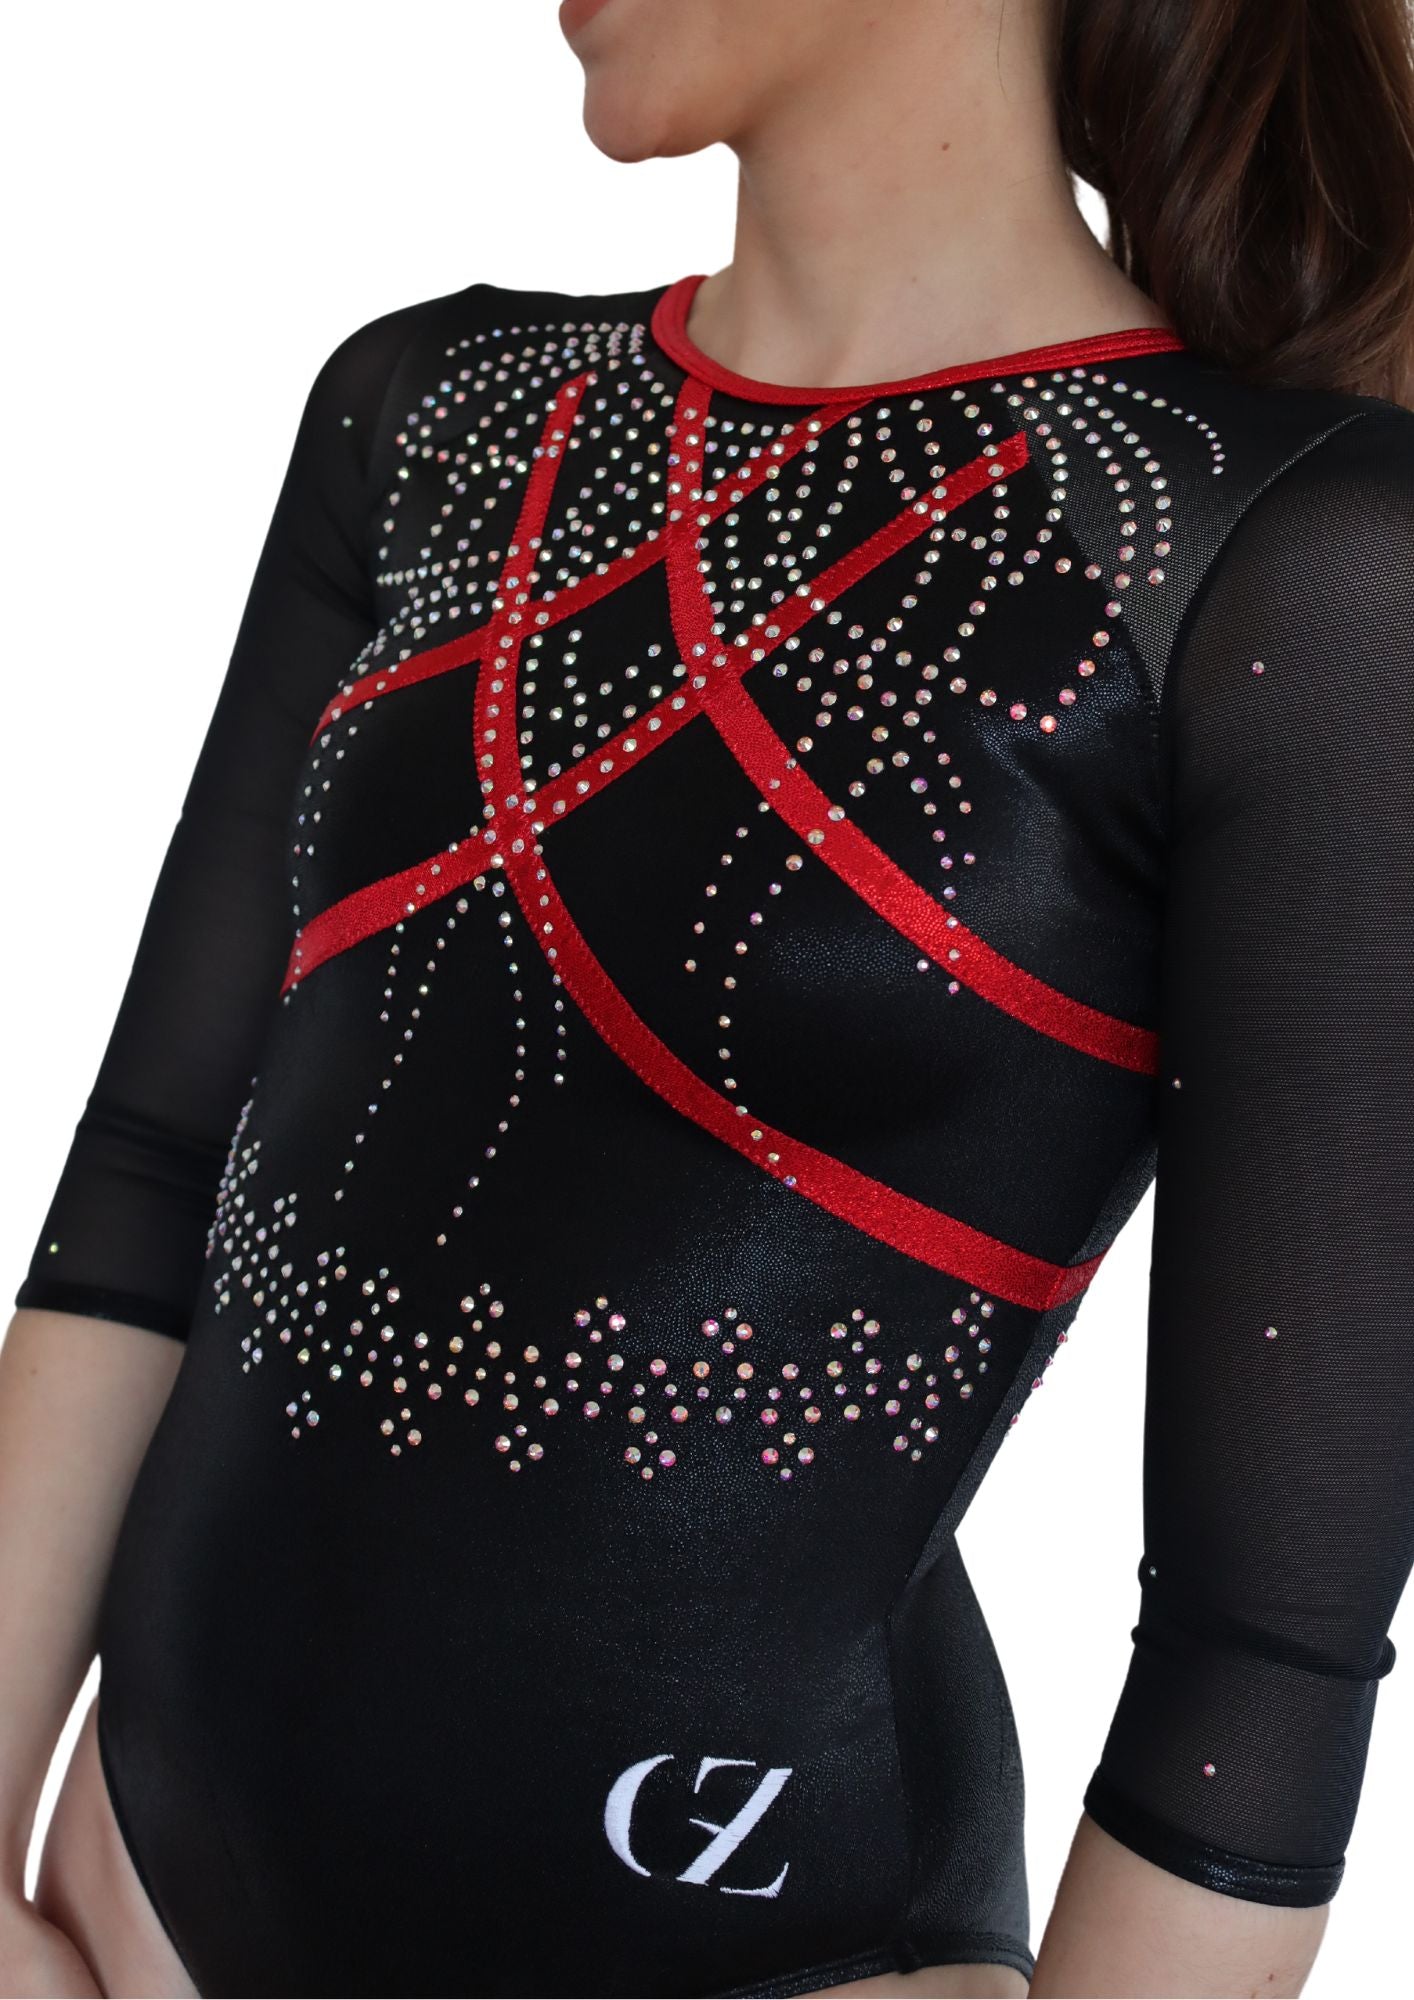 Leotard for girl, gymnastics, tumbling, trampolining, competition, training, shiny, comfortable, cheap